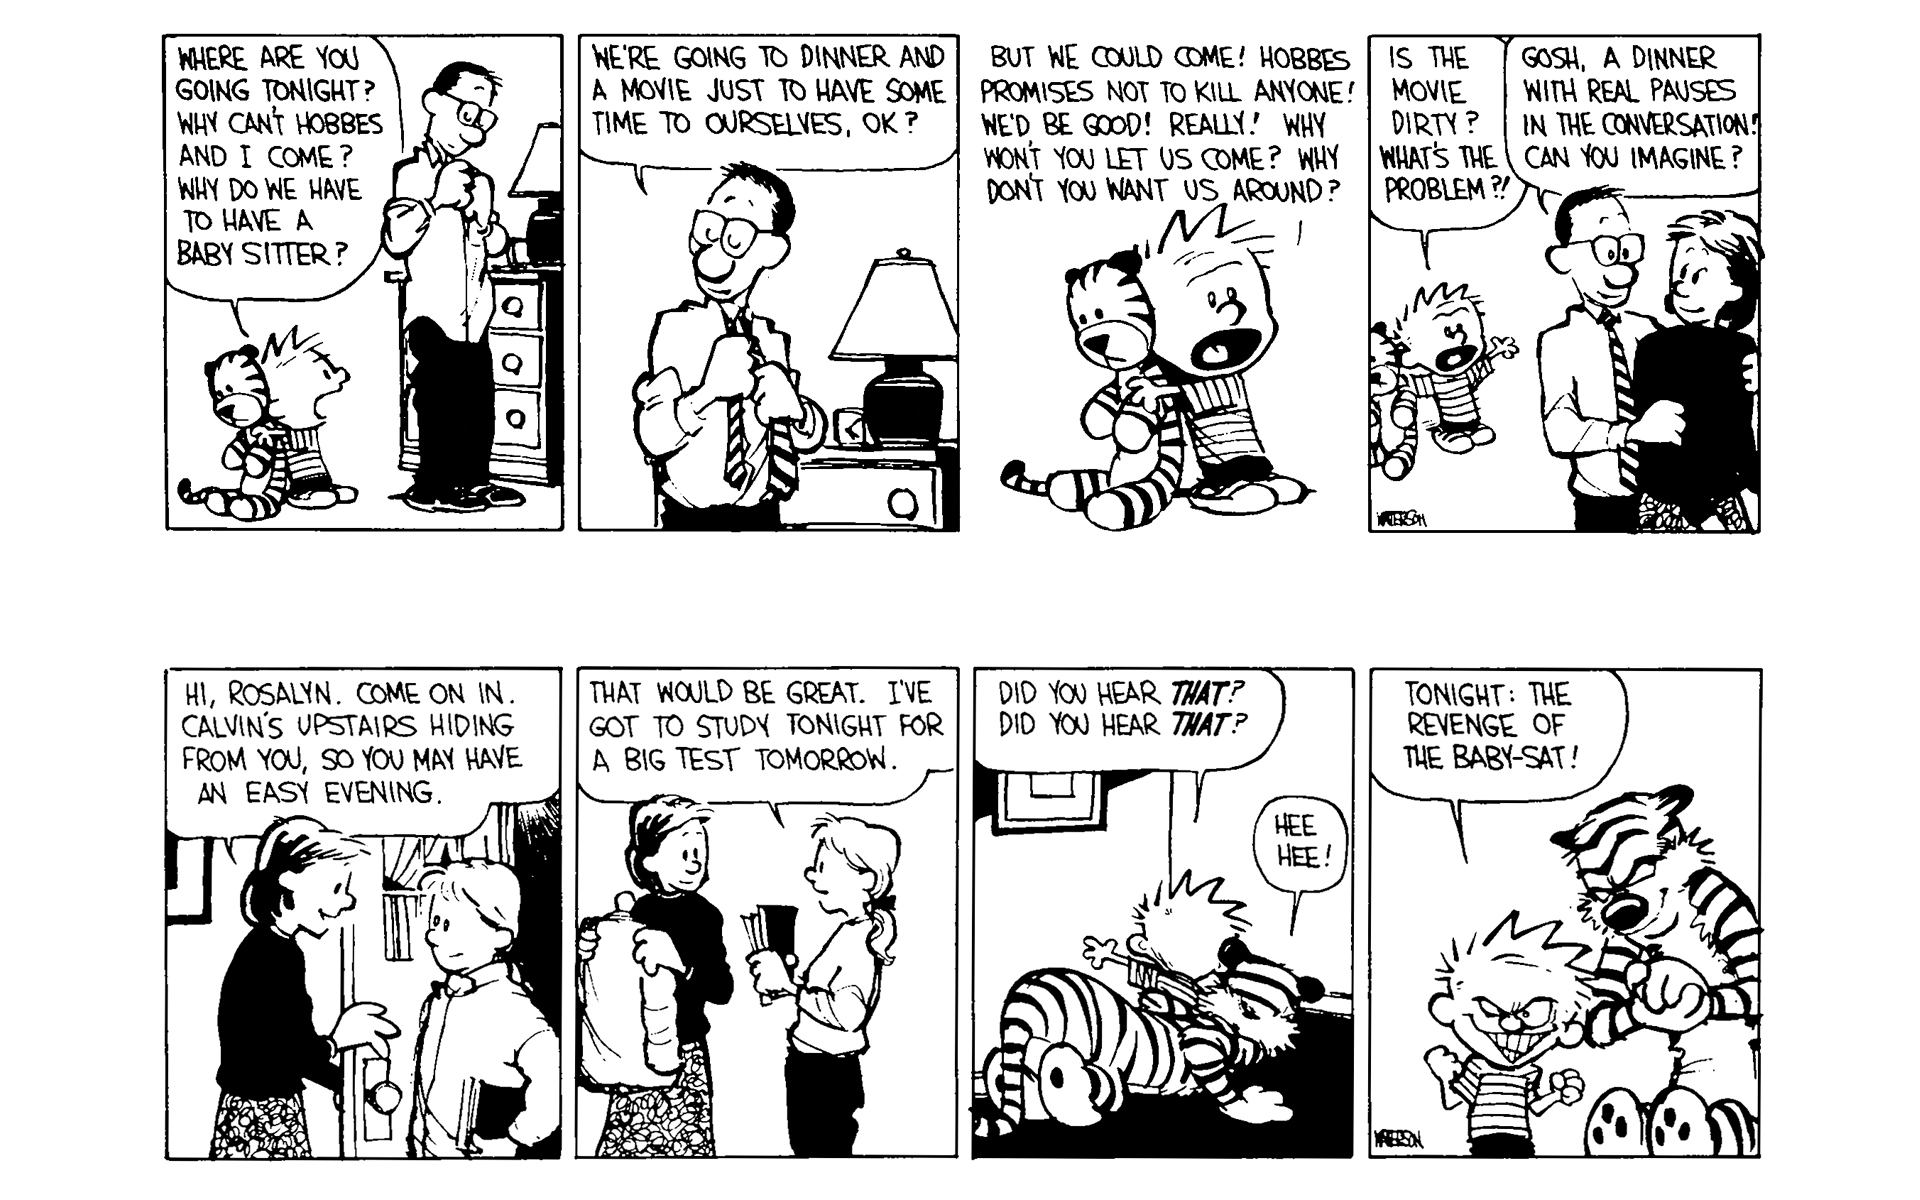 Calvin and Hobbes Issue 5 | Viewcomic reading comics online ...